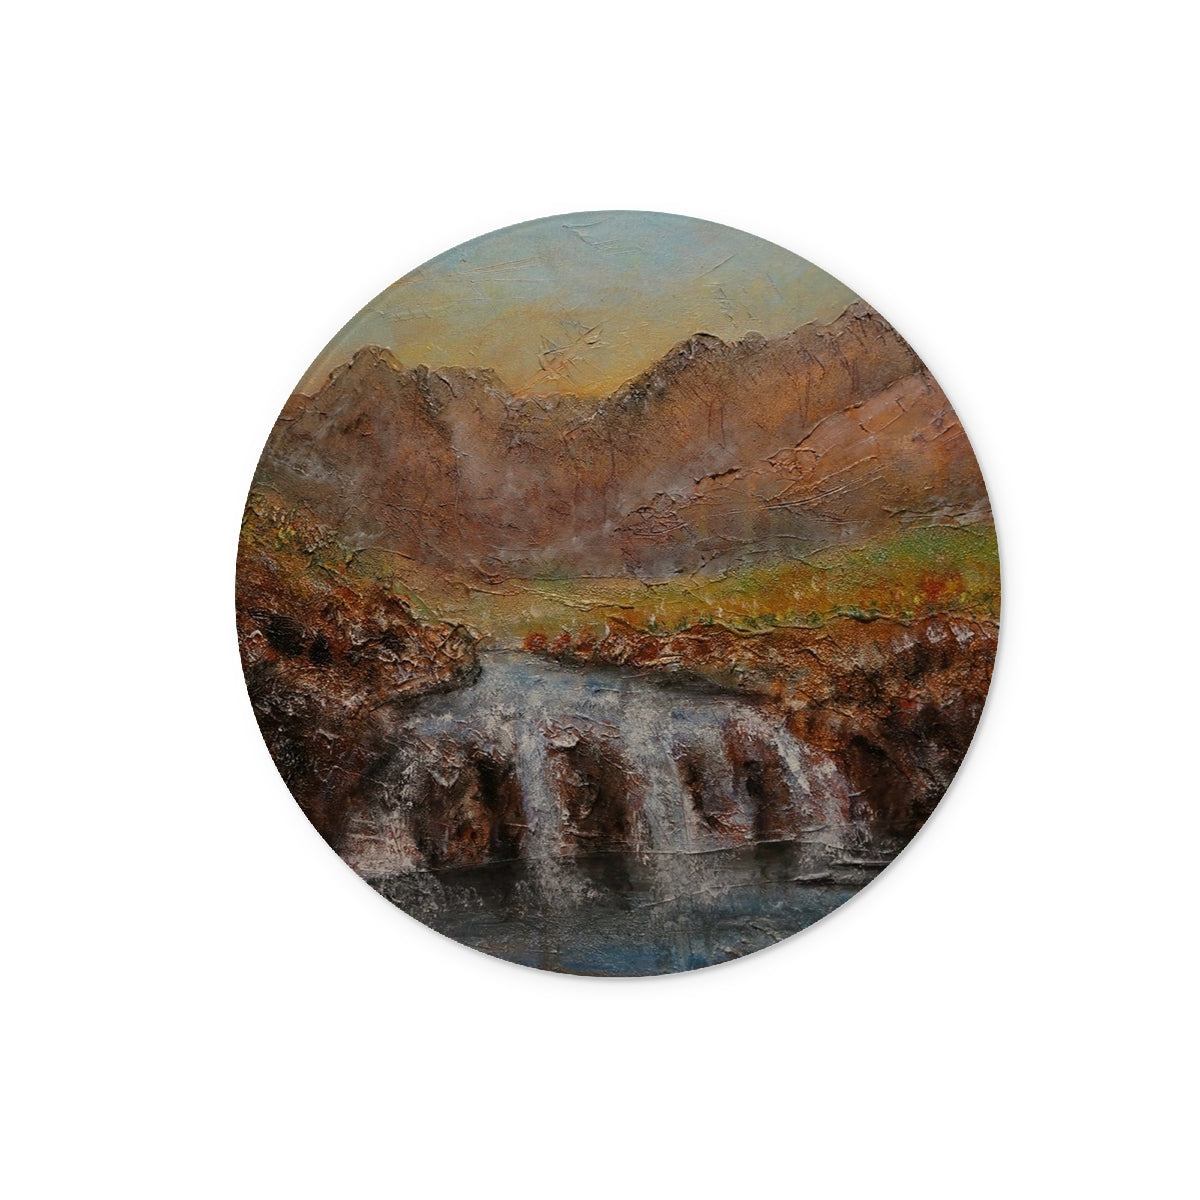 Fairy Pools Dawn Skye Art Gifts Glass Chopping Board-Glass Chopping Boards-Skye Art Gallery-12" Round-Paintings, Prints, Homeware, Art Gifts From Scotland By Scottish Artist Kevin Hunter